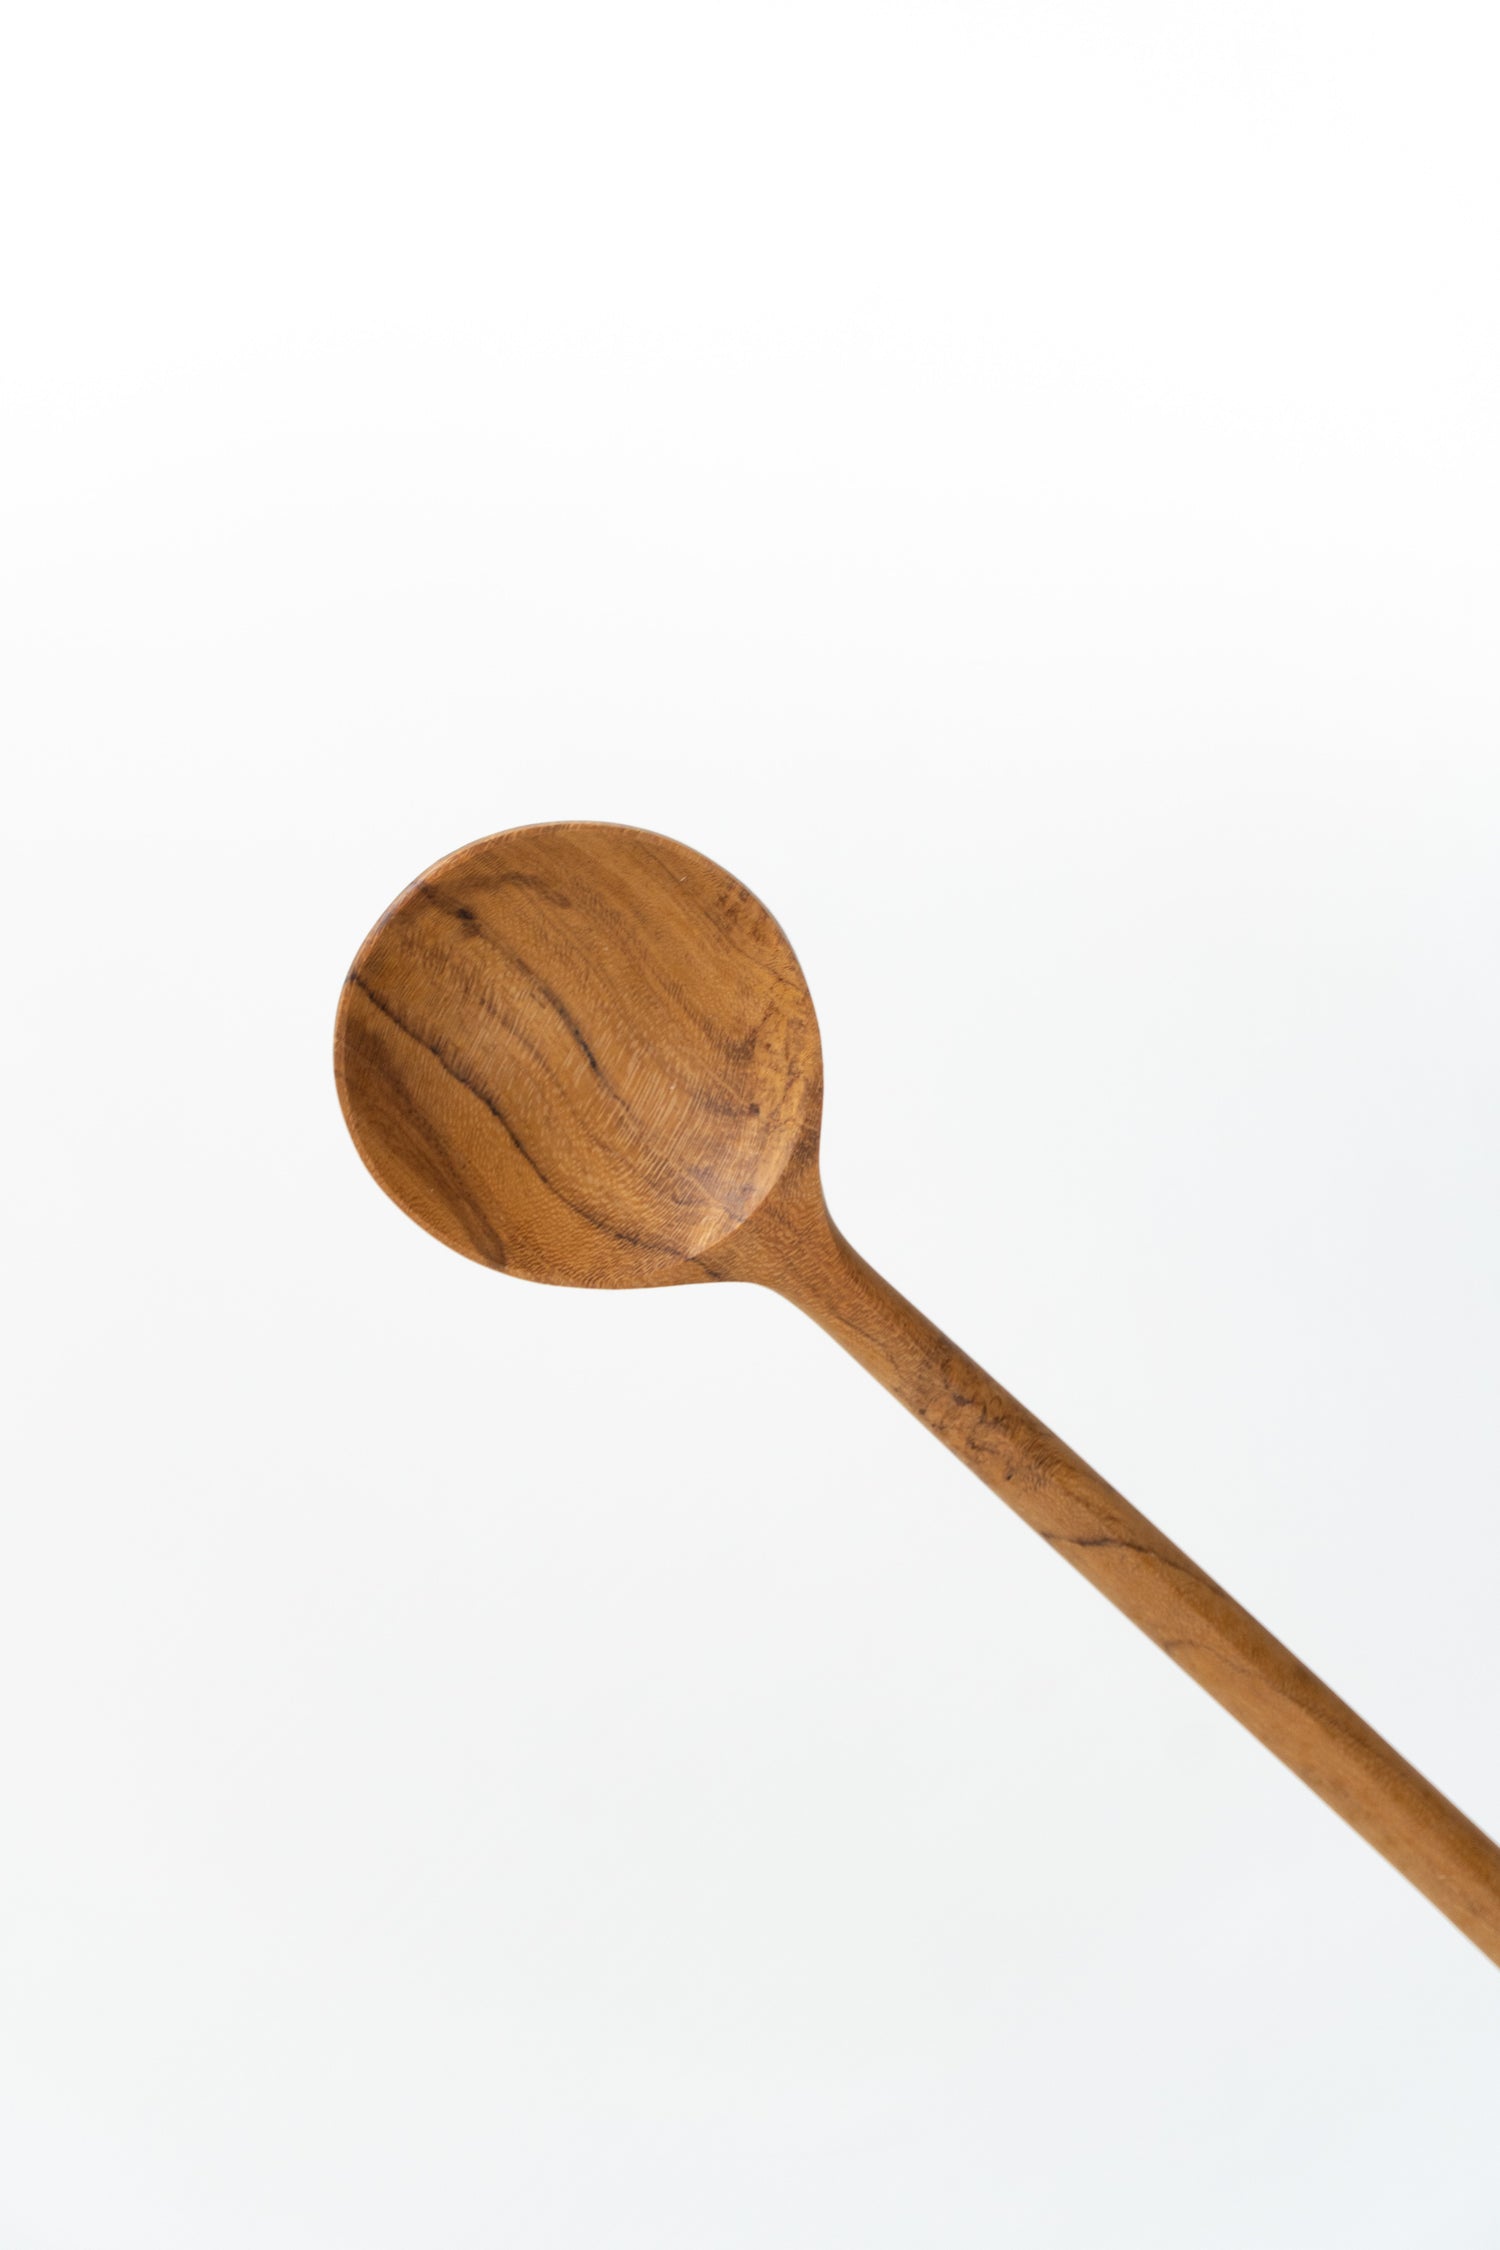 Close-up of the Wooden Slim Spoon by The Loft Selects.